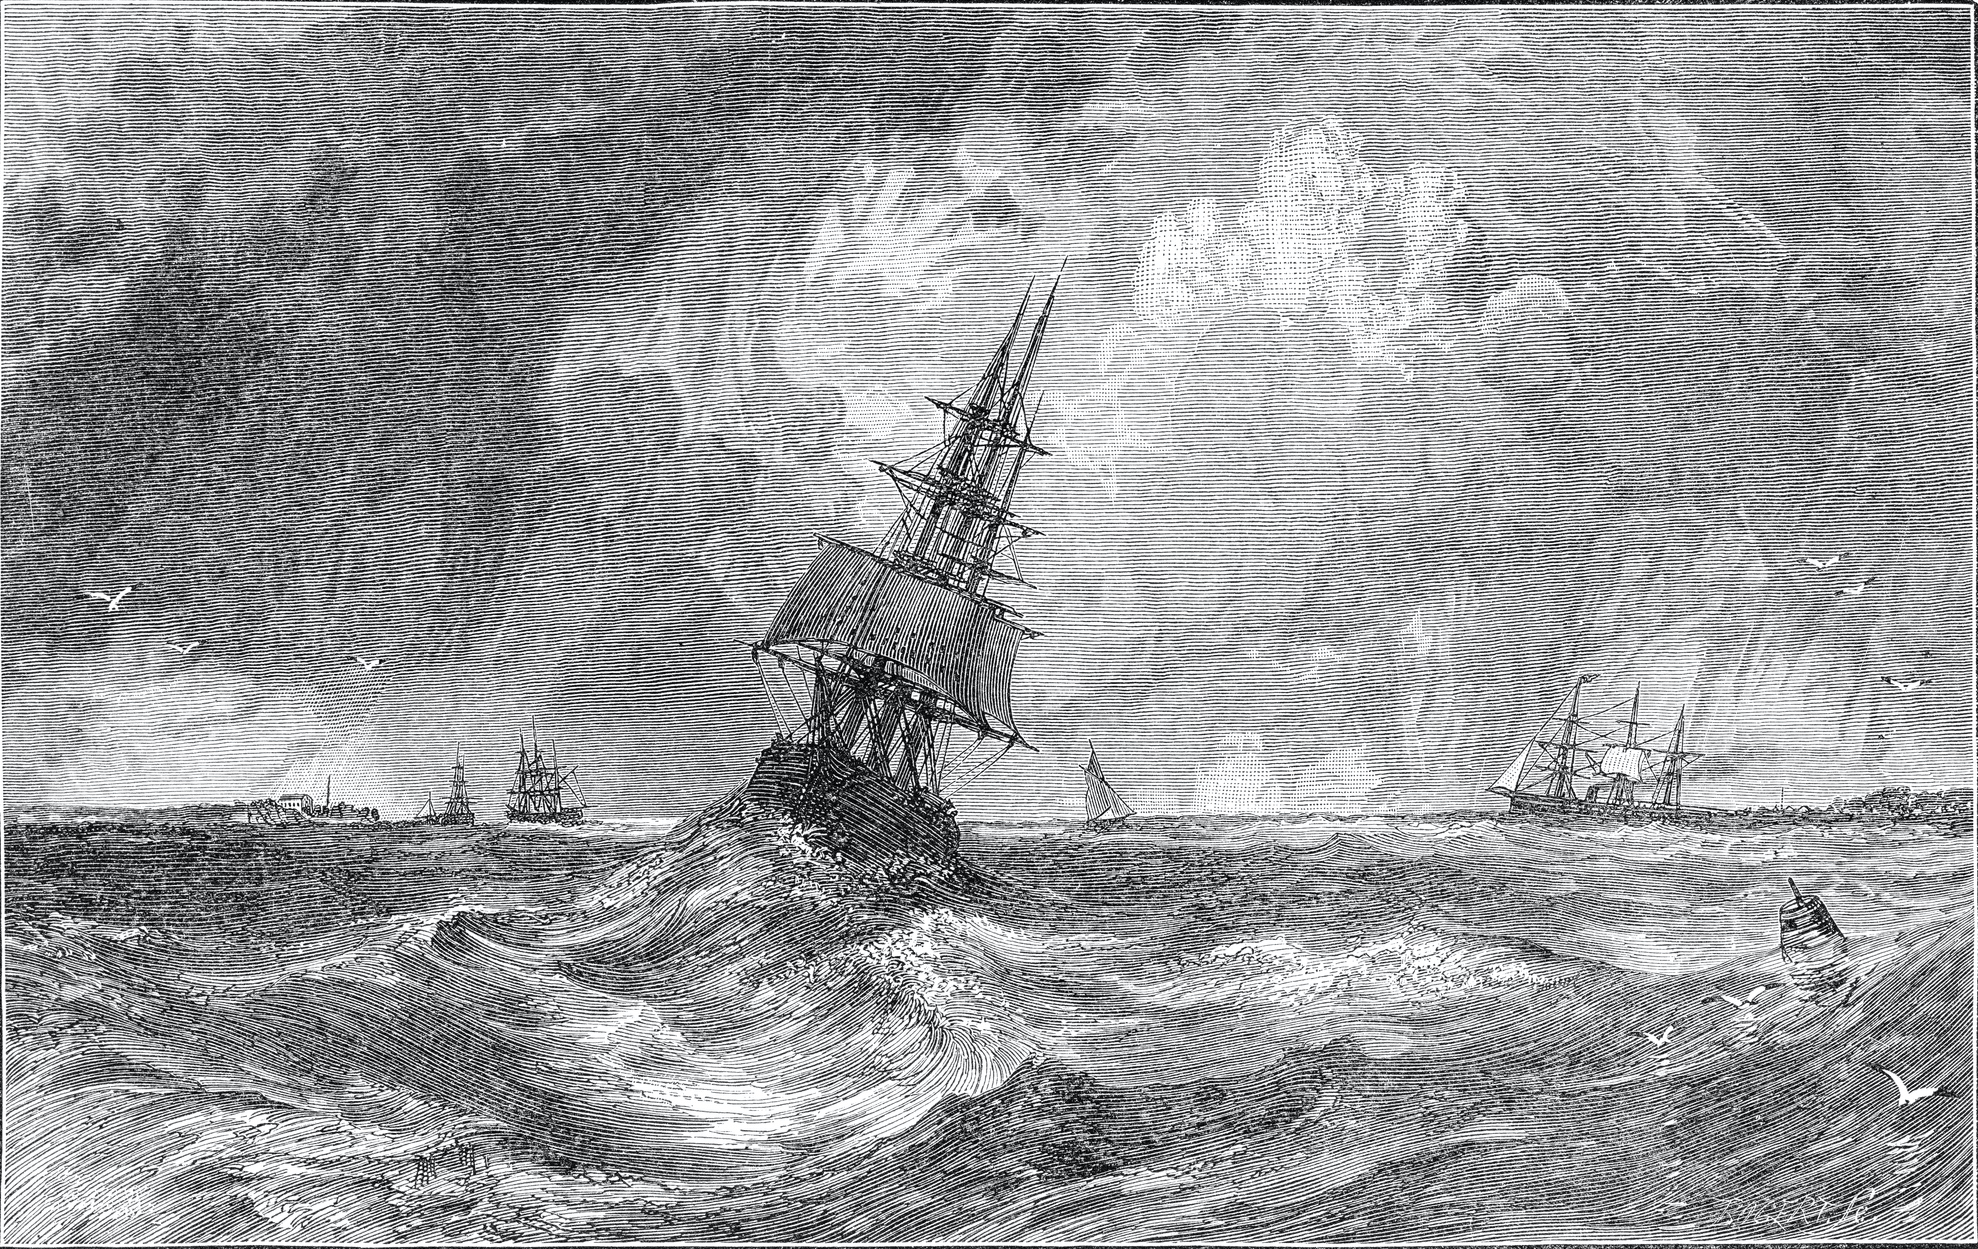 An antique illustration of a ship on a stormy sea.